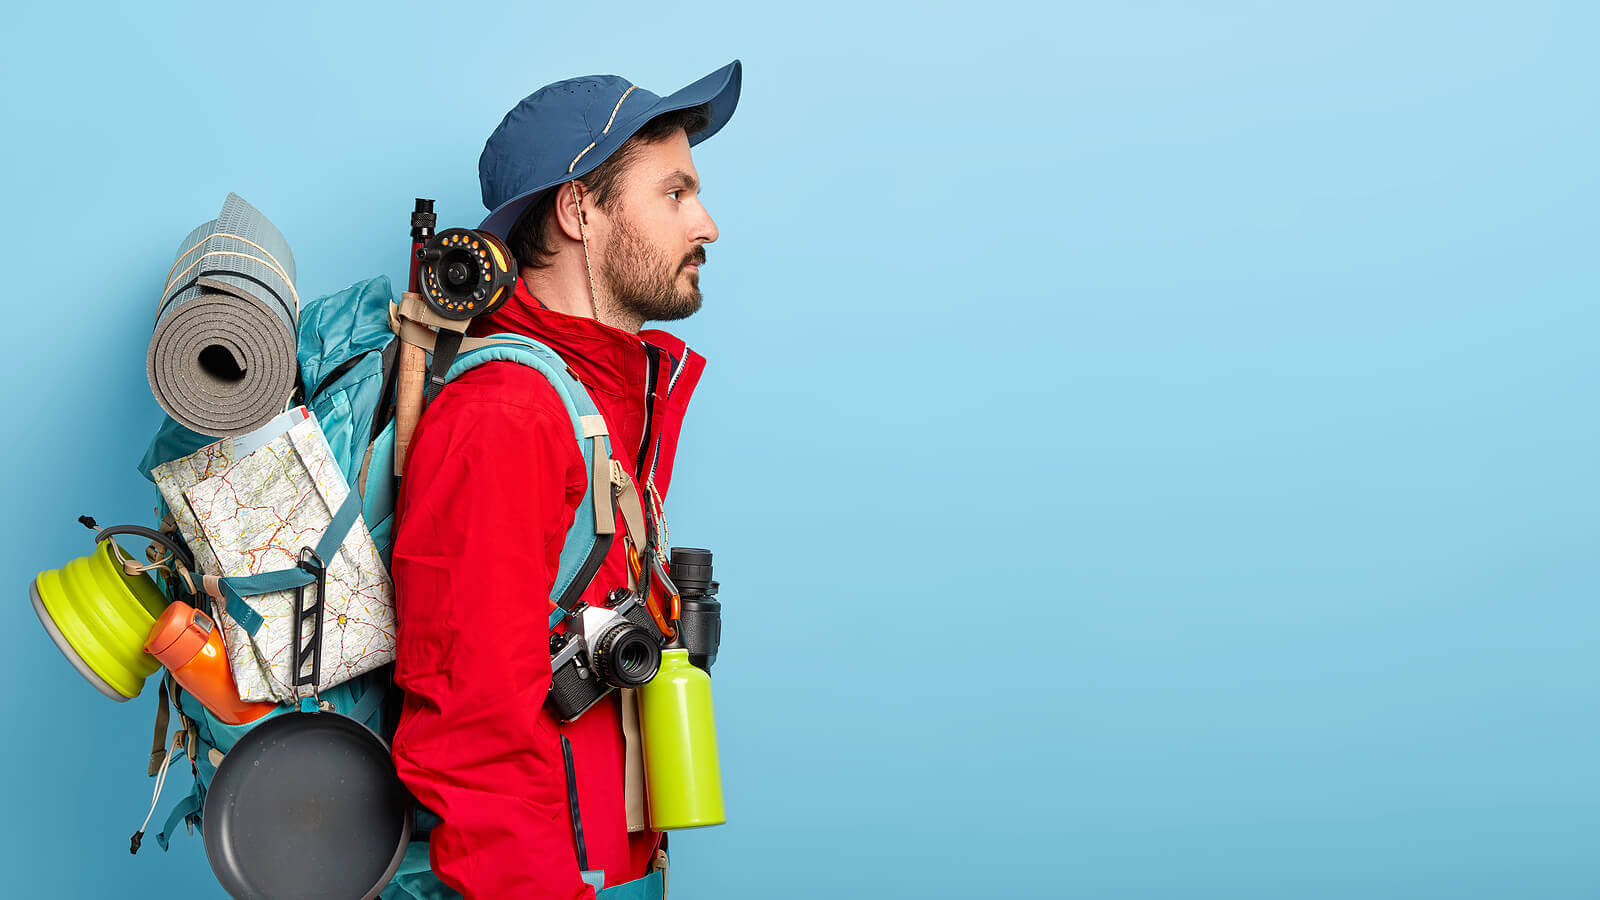 How to Prepare Your Backpack to Go Hiking